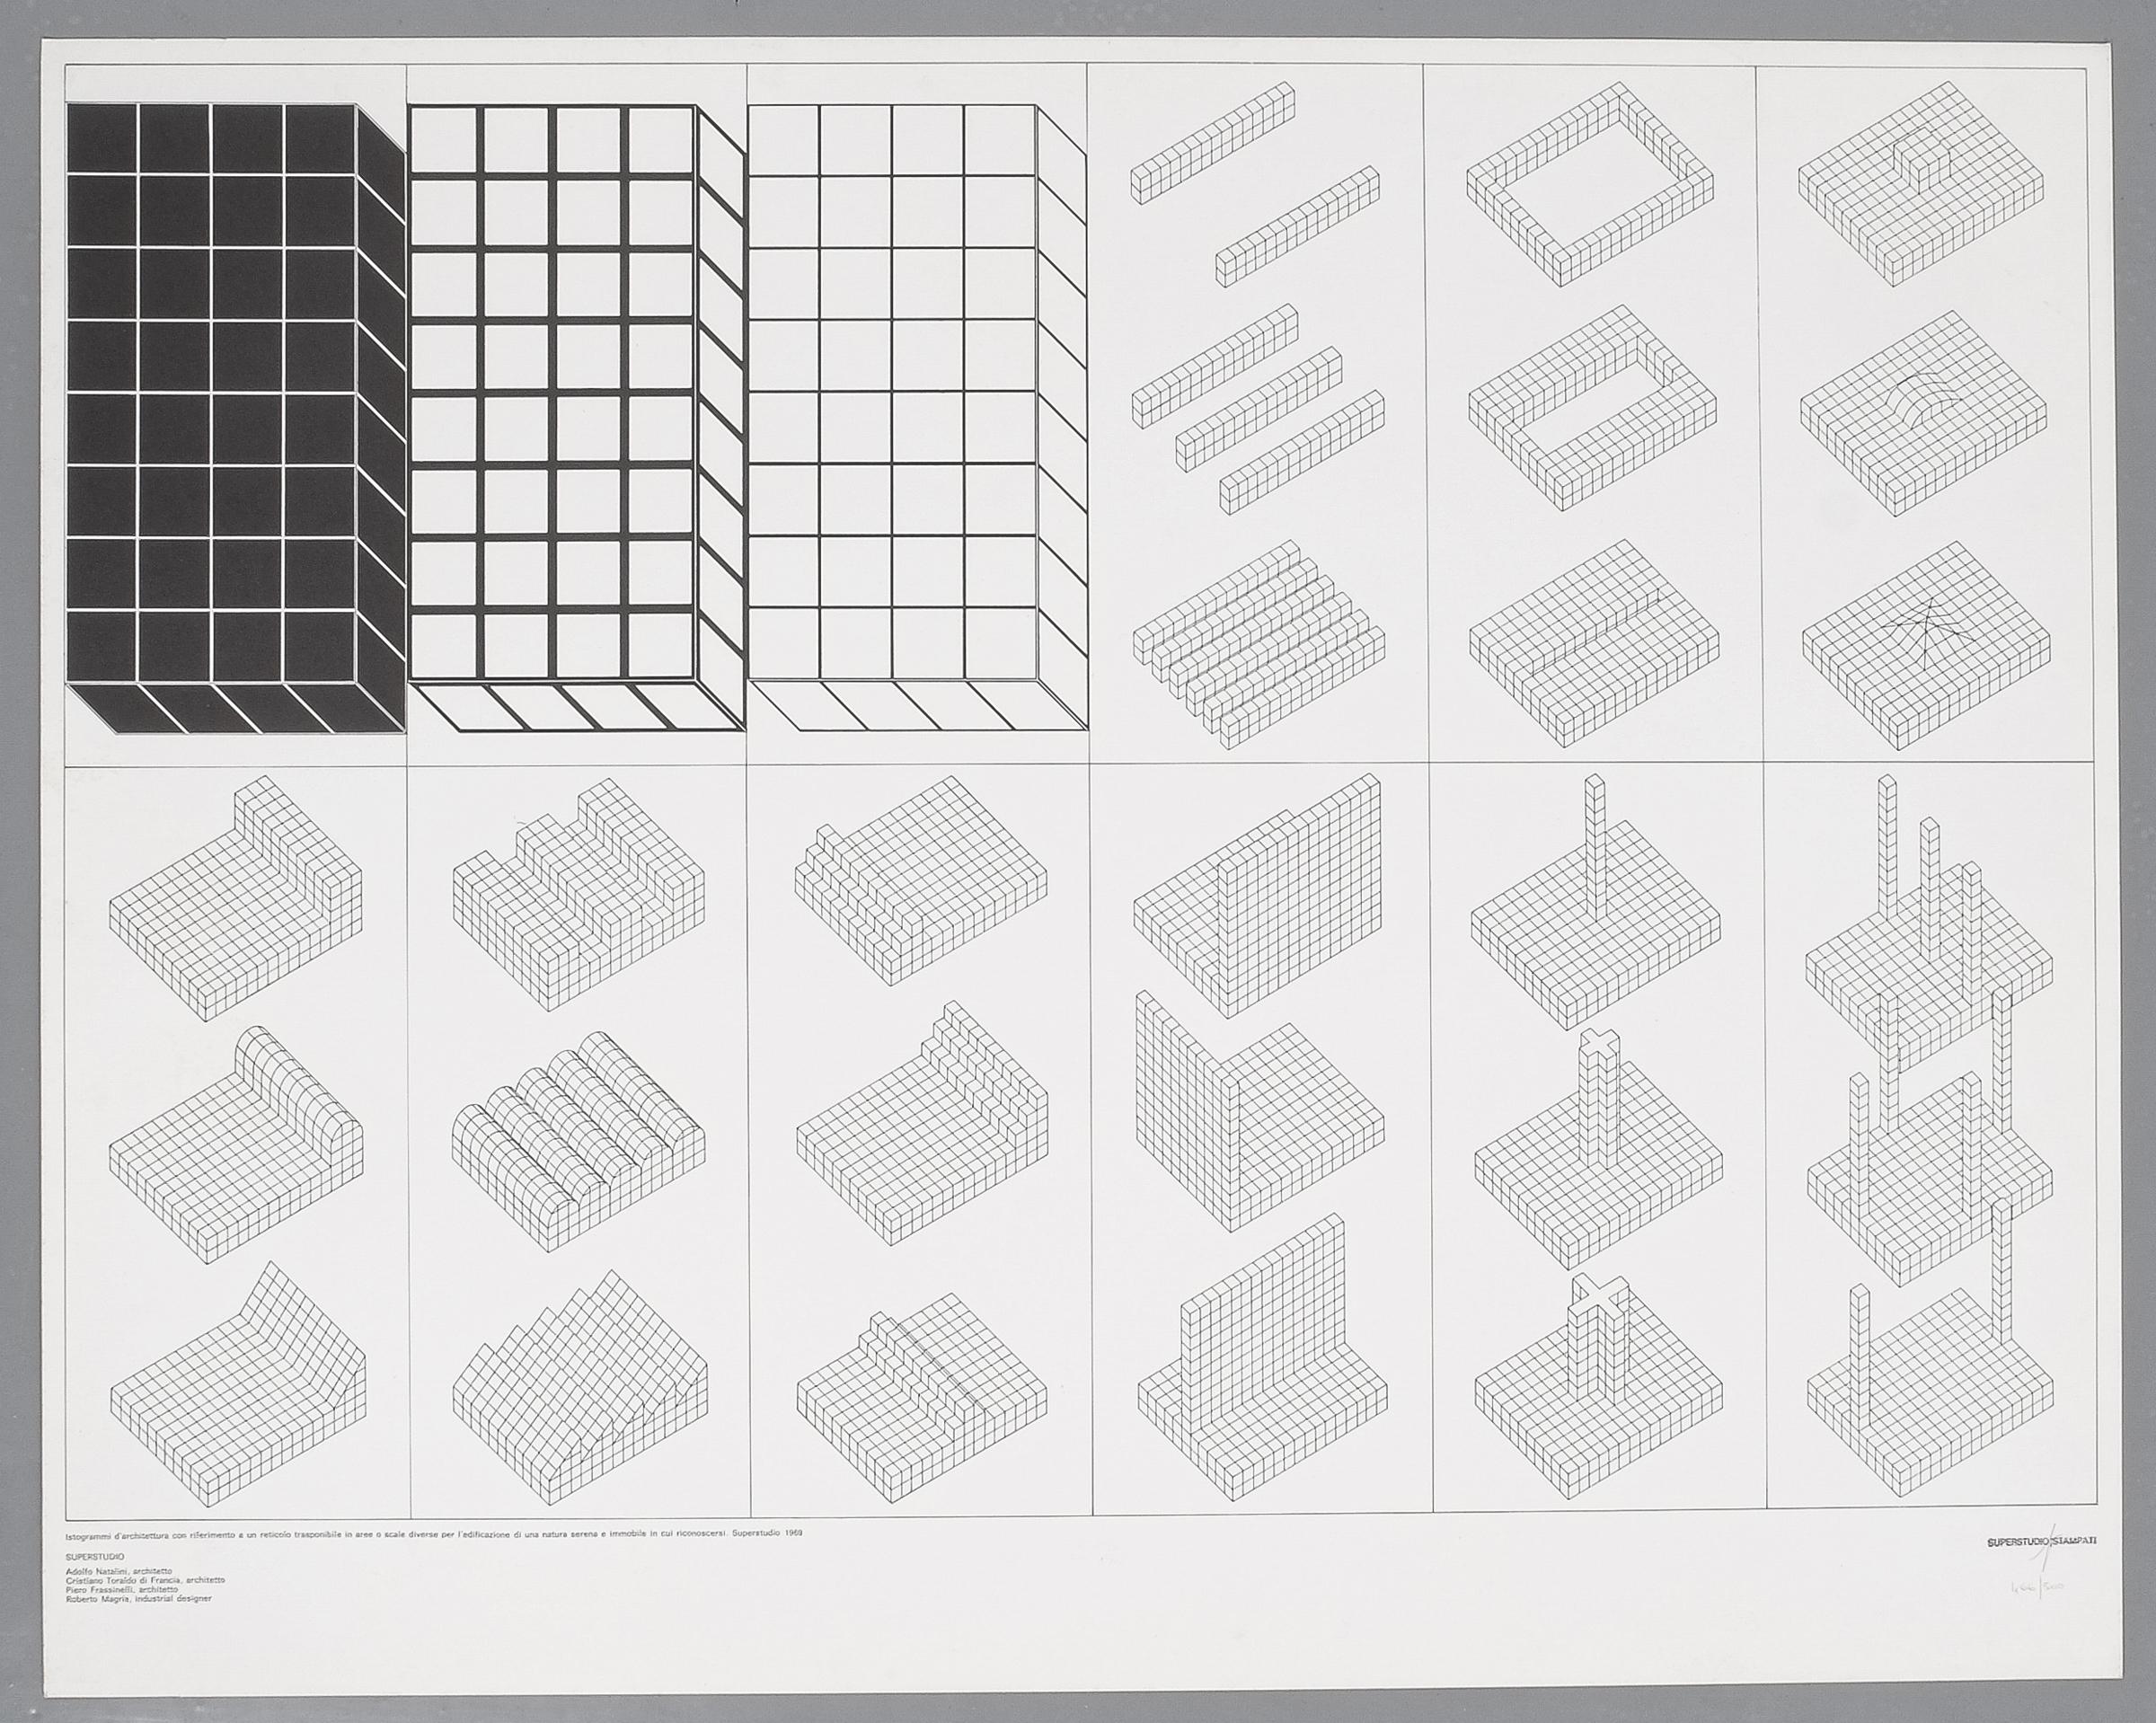 Superstudio Lithograph Istogrammi d'architettura 466/500, Italy, 1969. Edizioni Plura.
Lithograph on paper depicting architectural histograms with reference to a lattice that can be transposed into different areas or scales for the construction of